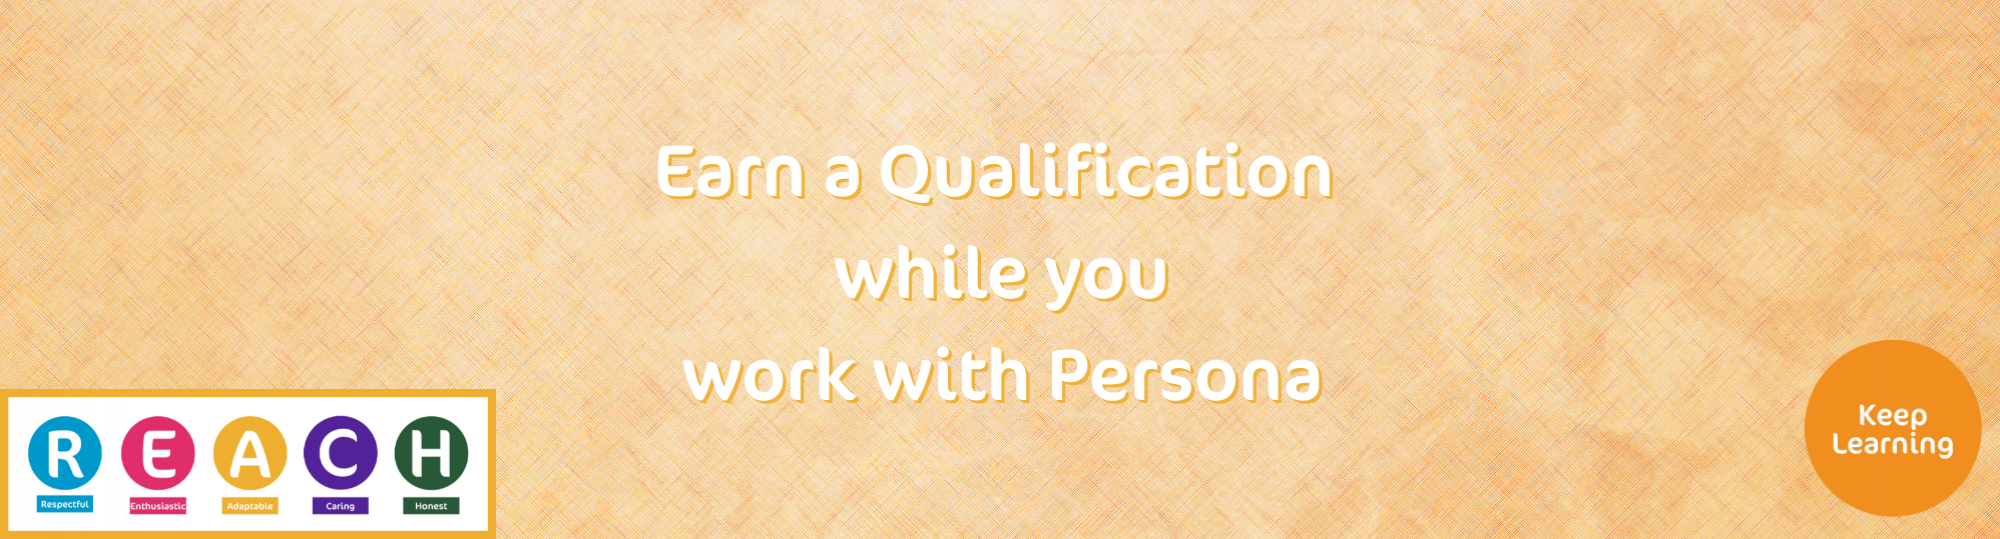 Gain a Qualification as You Earn With Persona